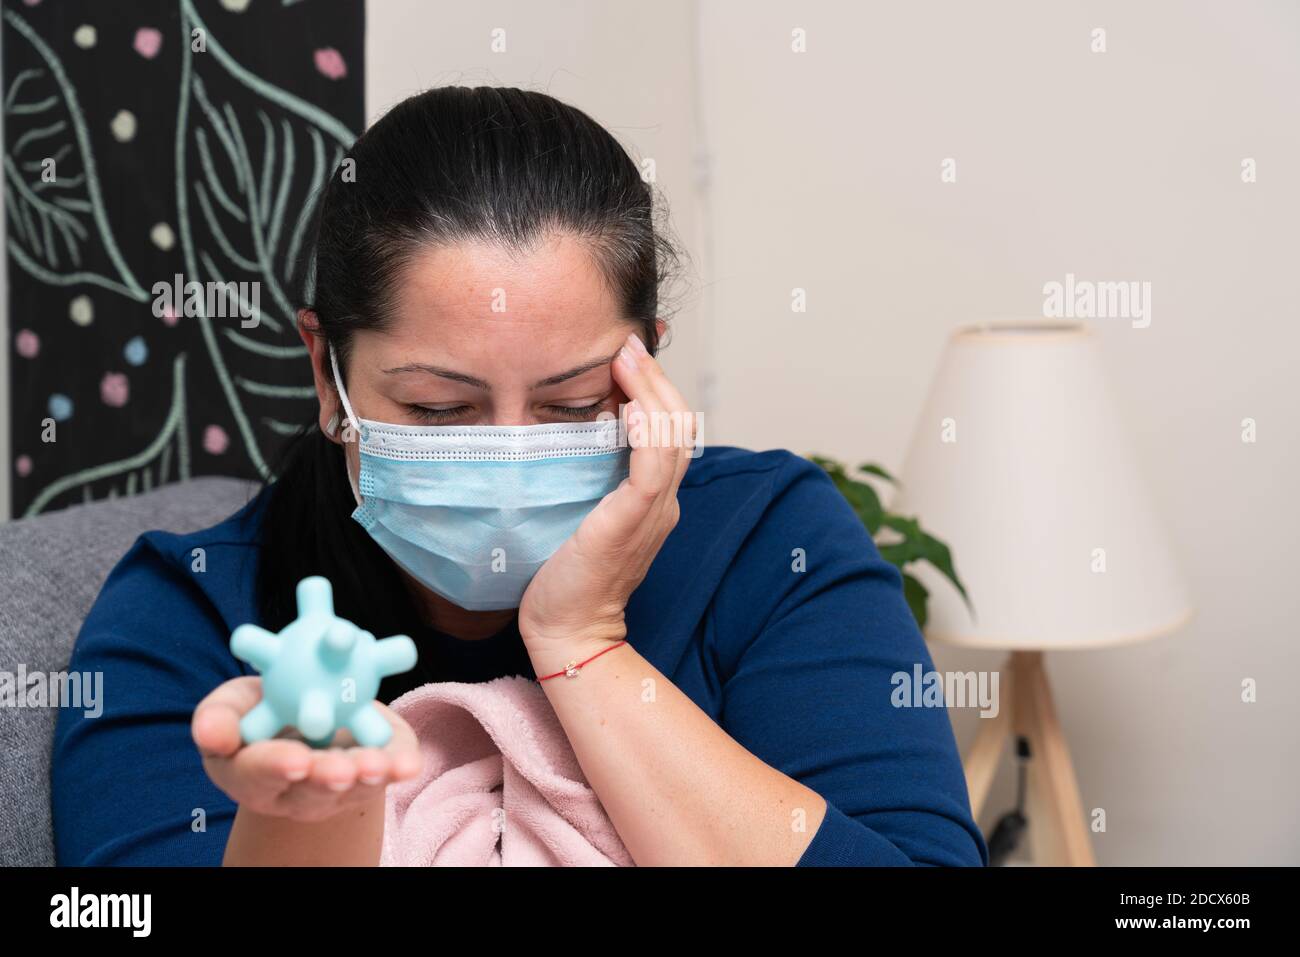 Ill adult woman with concerned expression wearing medical or surgical mask to protect from covid19 influenza infection presenting fake virus as pandem Stock Photo